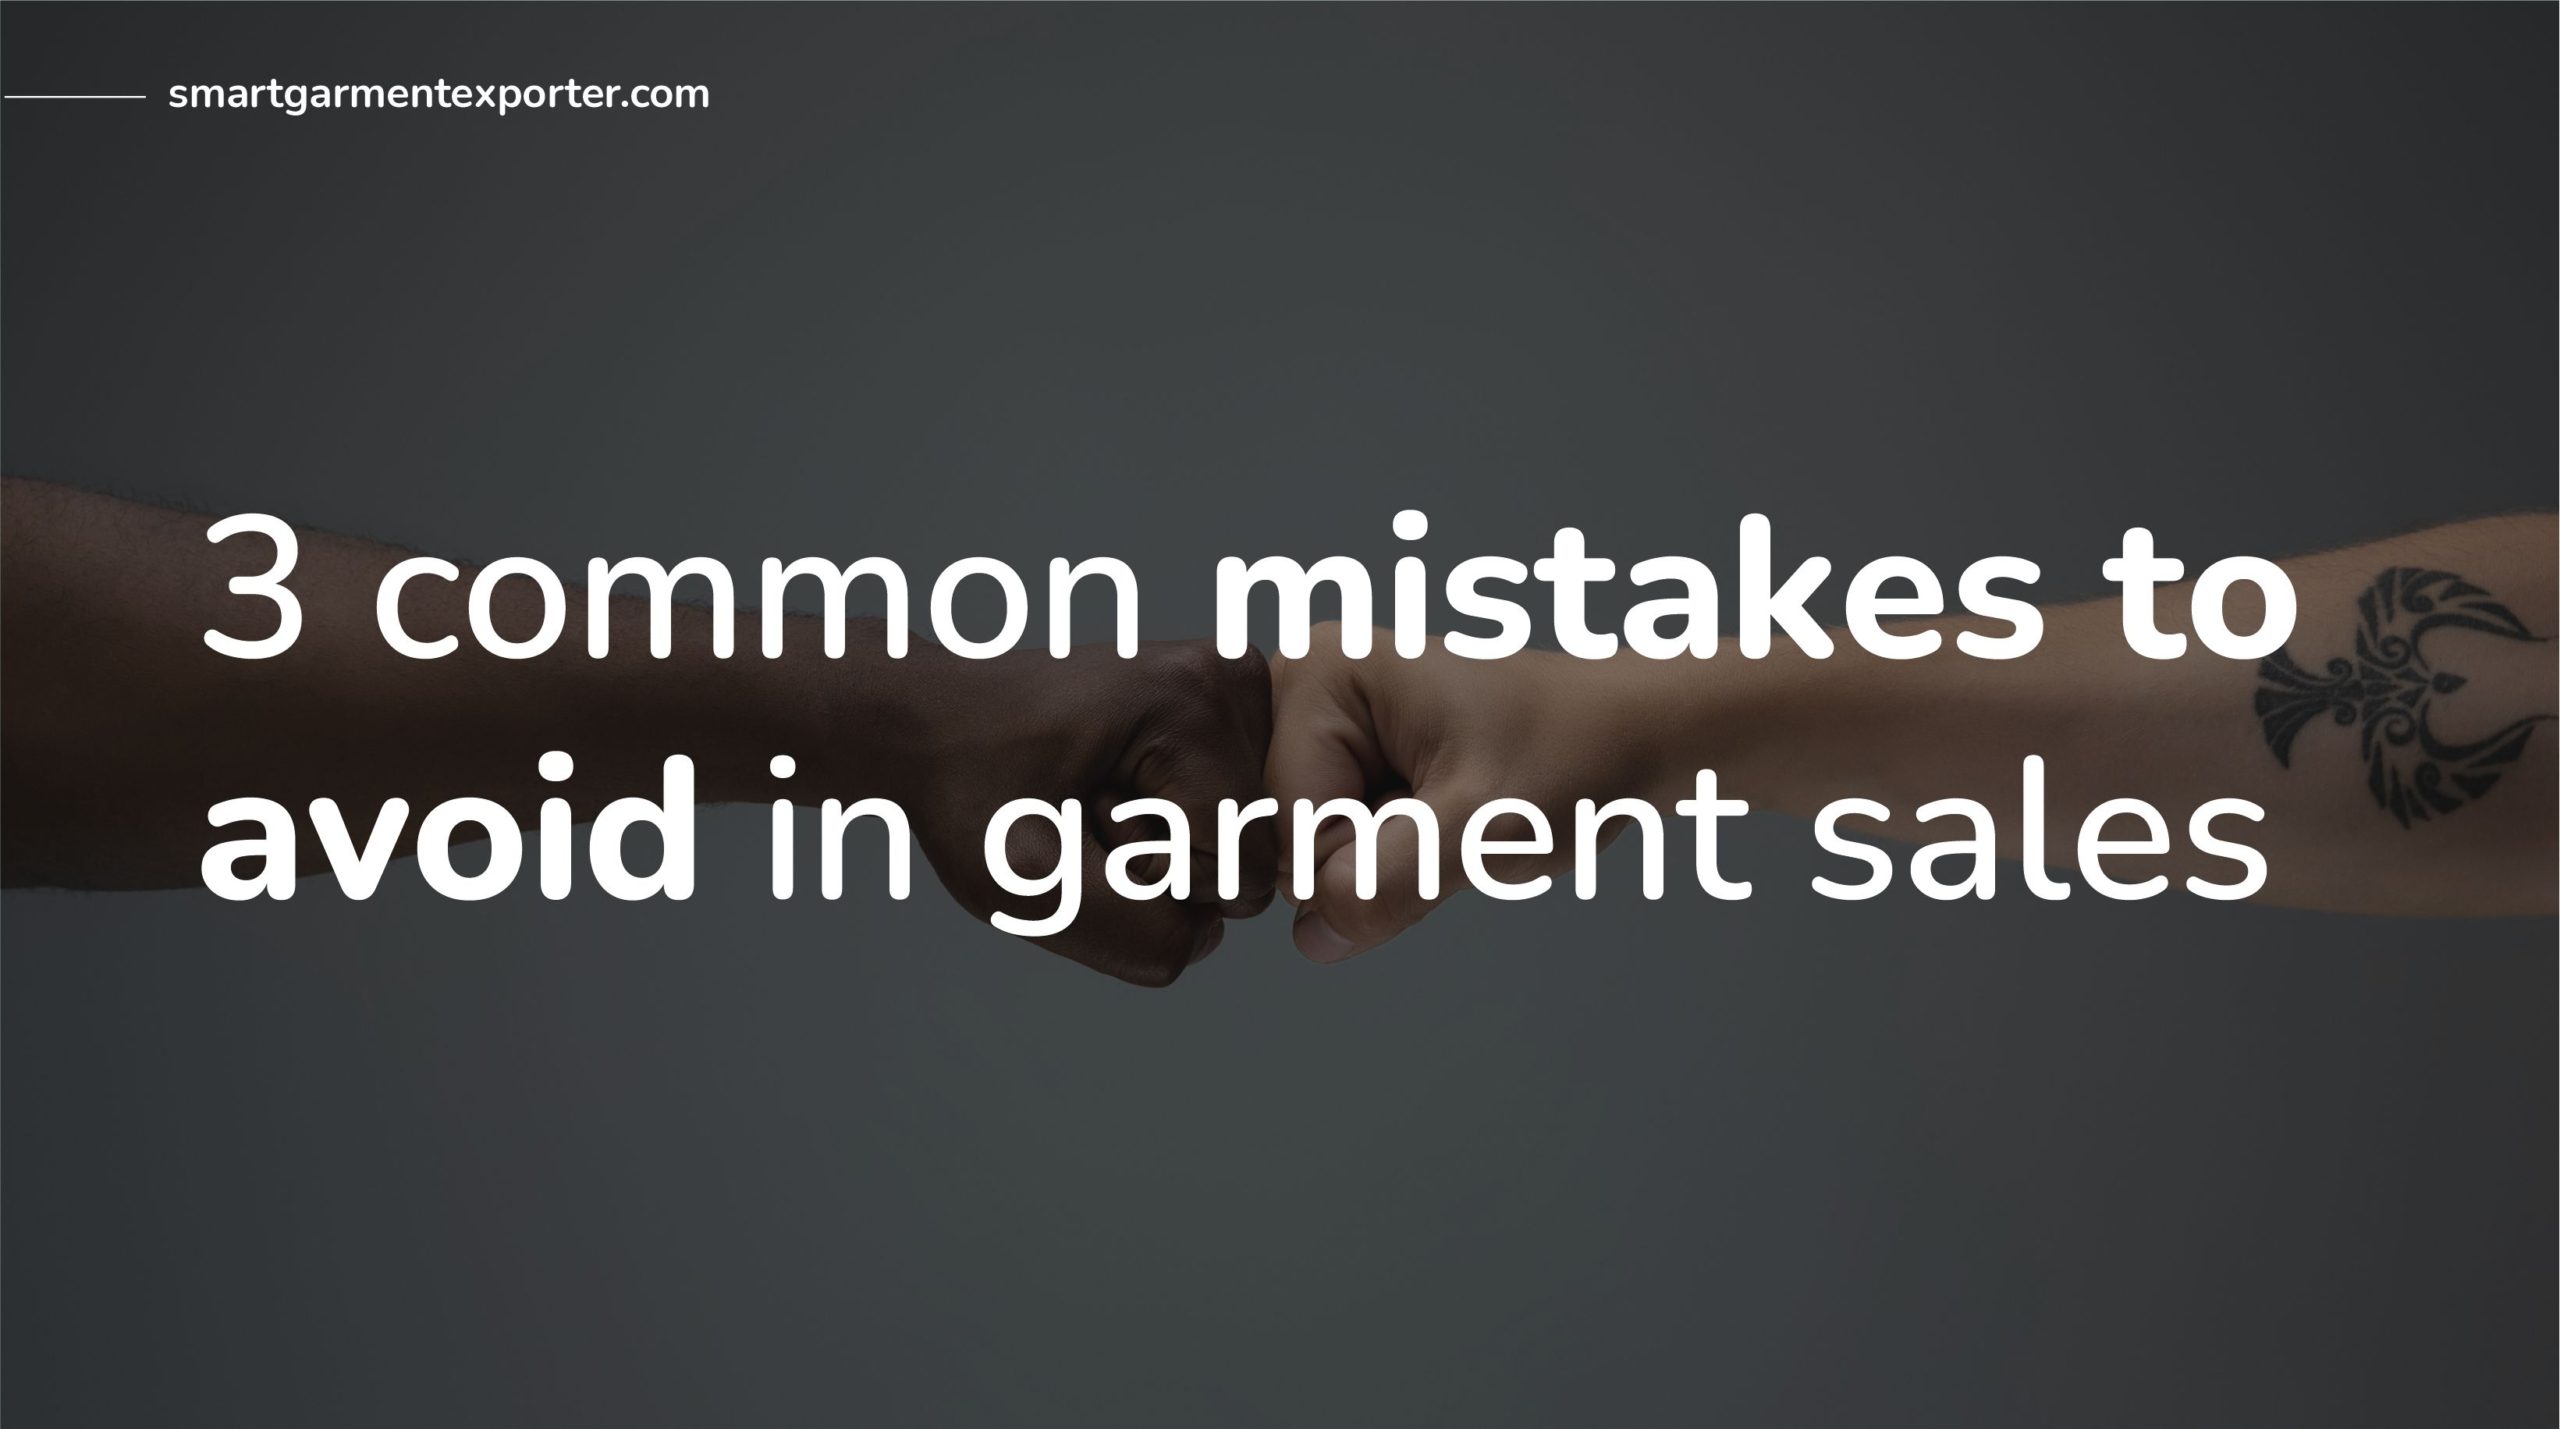 3 common mistakes to avoid in garment sales